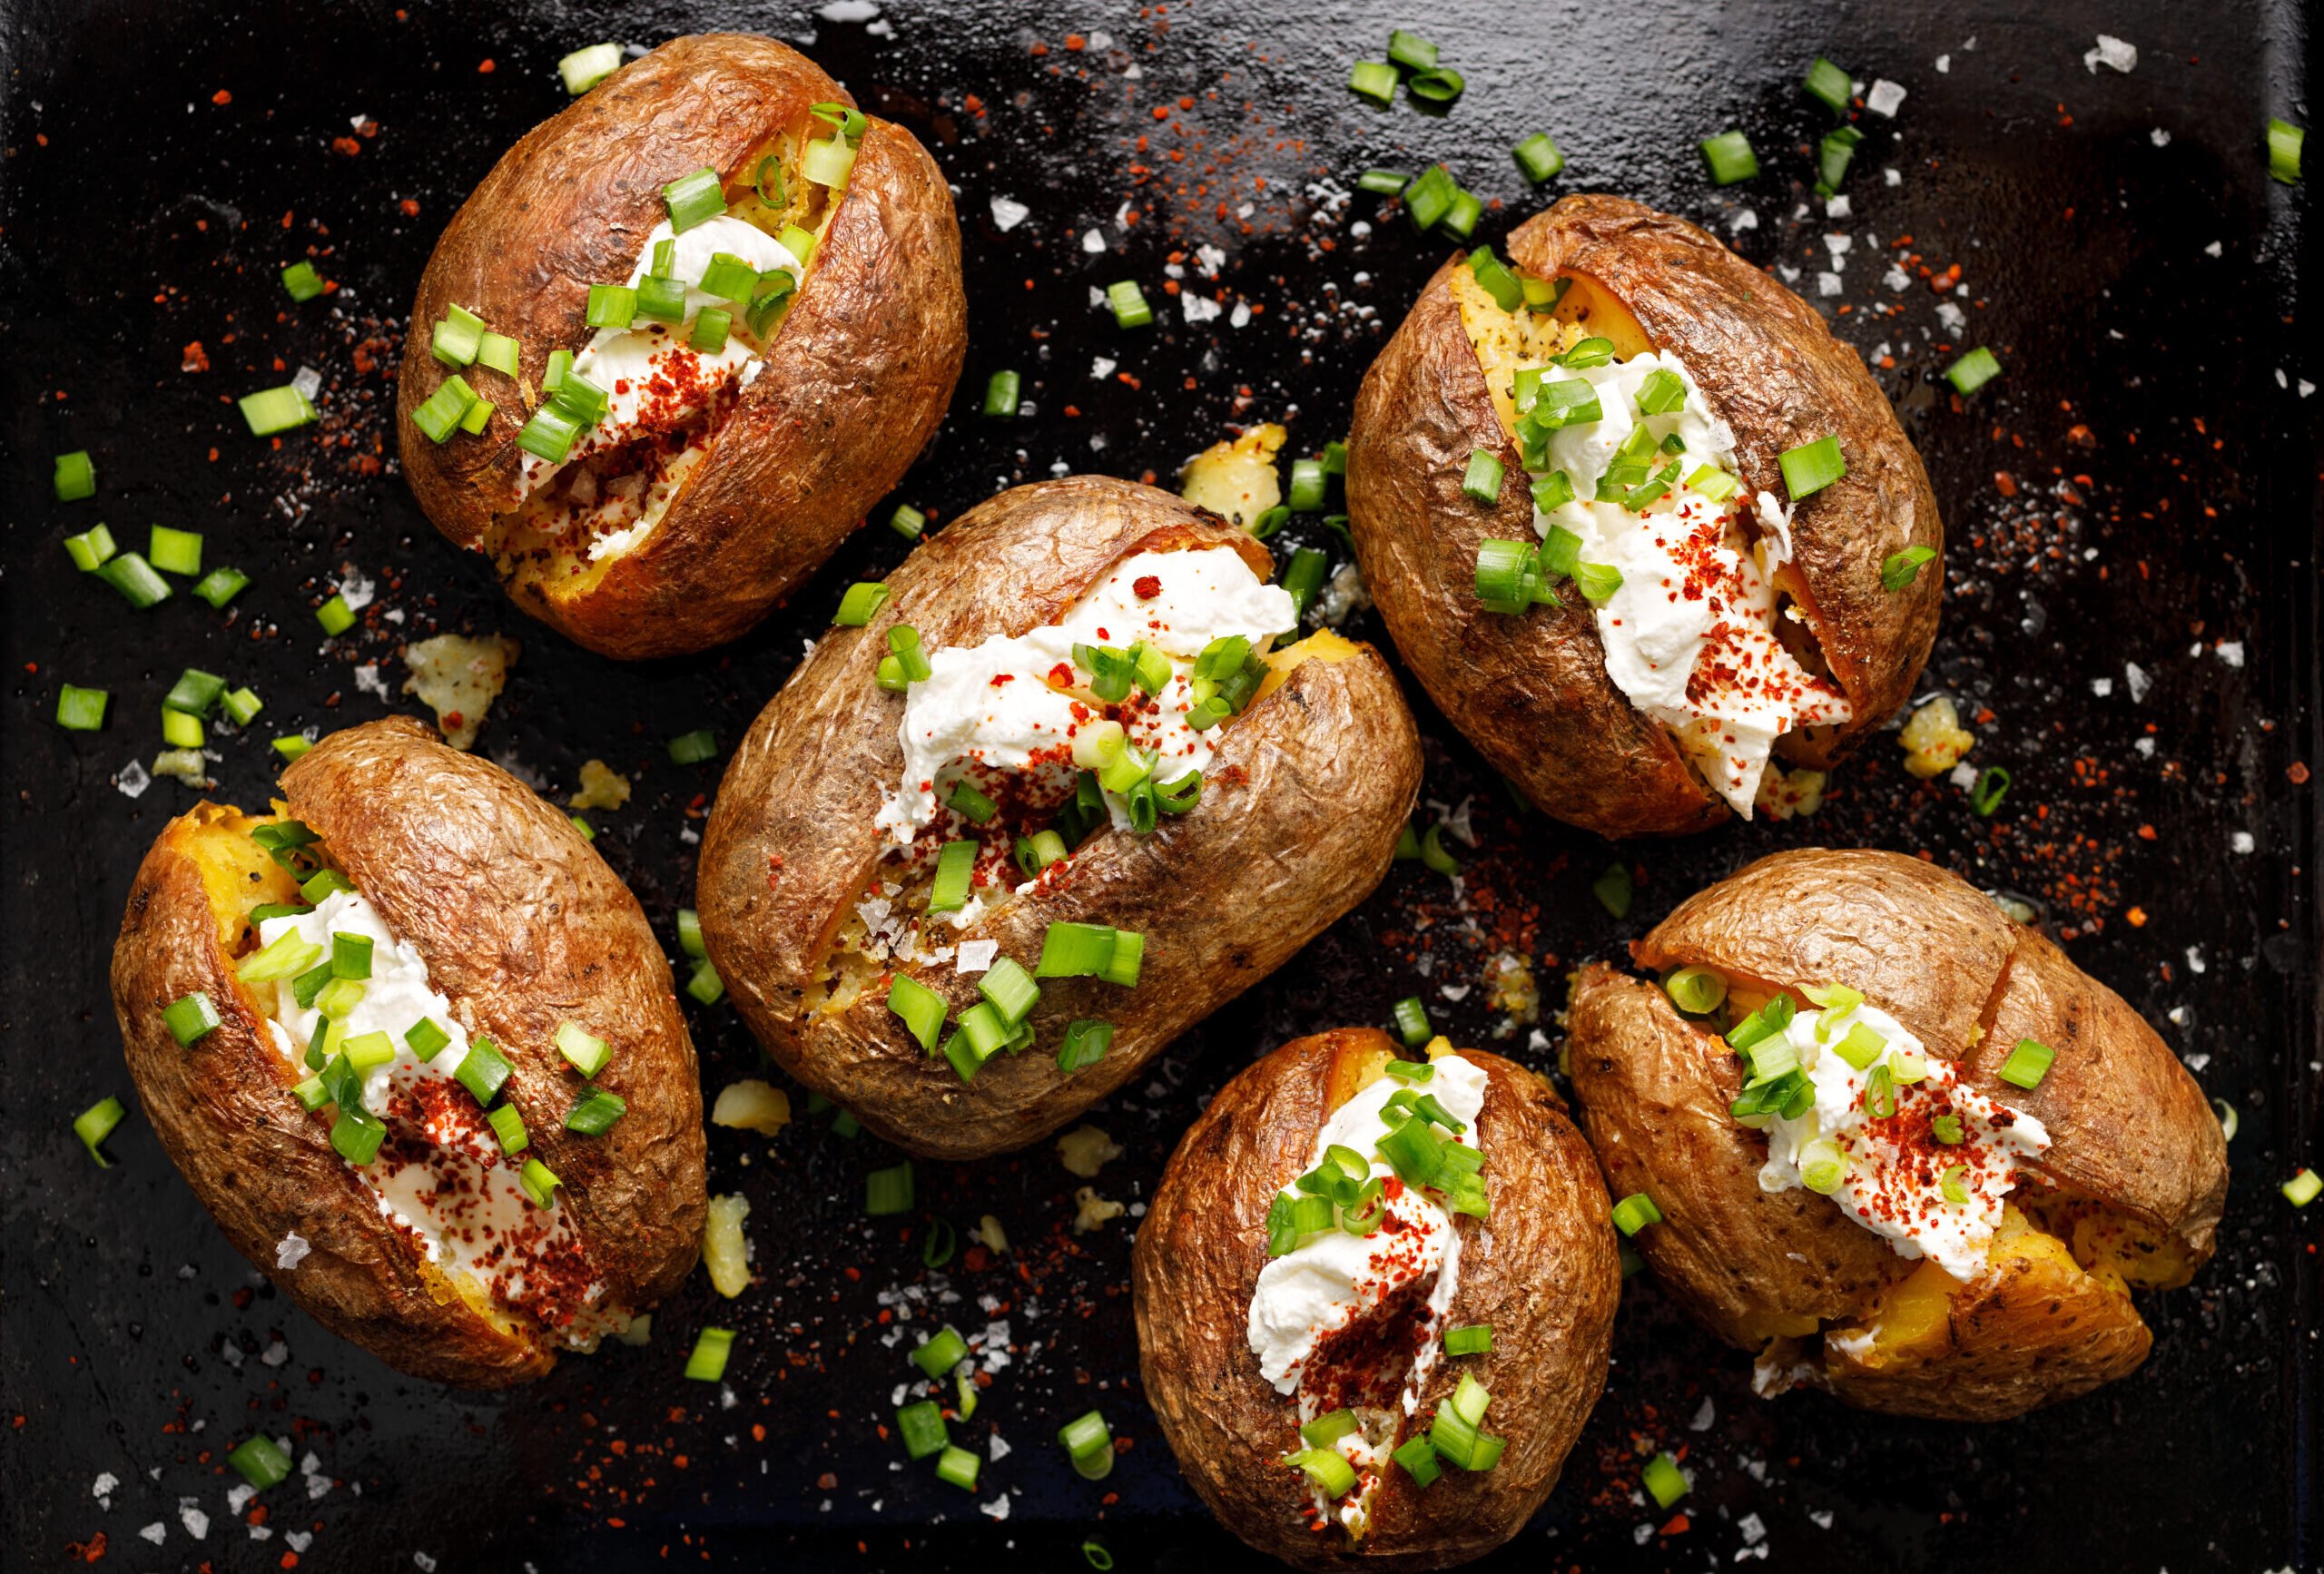 How to make a perfect baked potato according to a professional chef